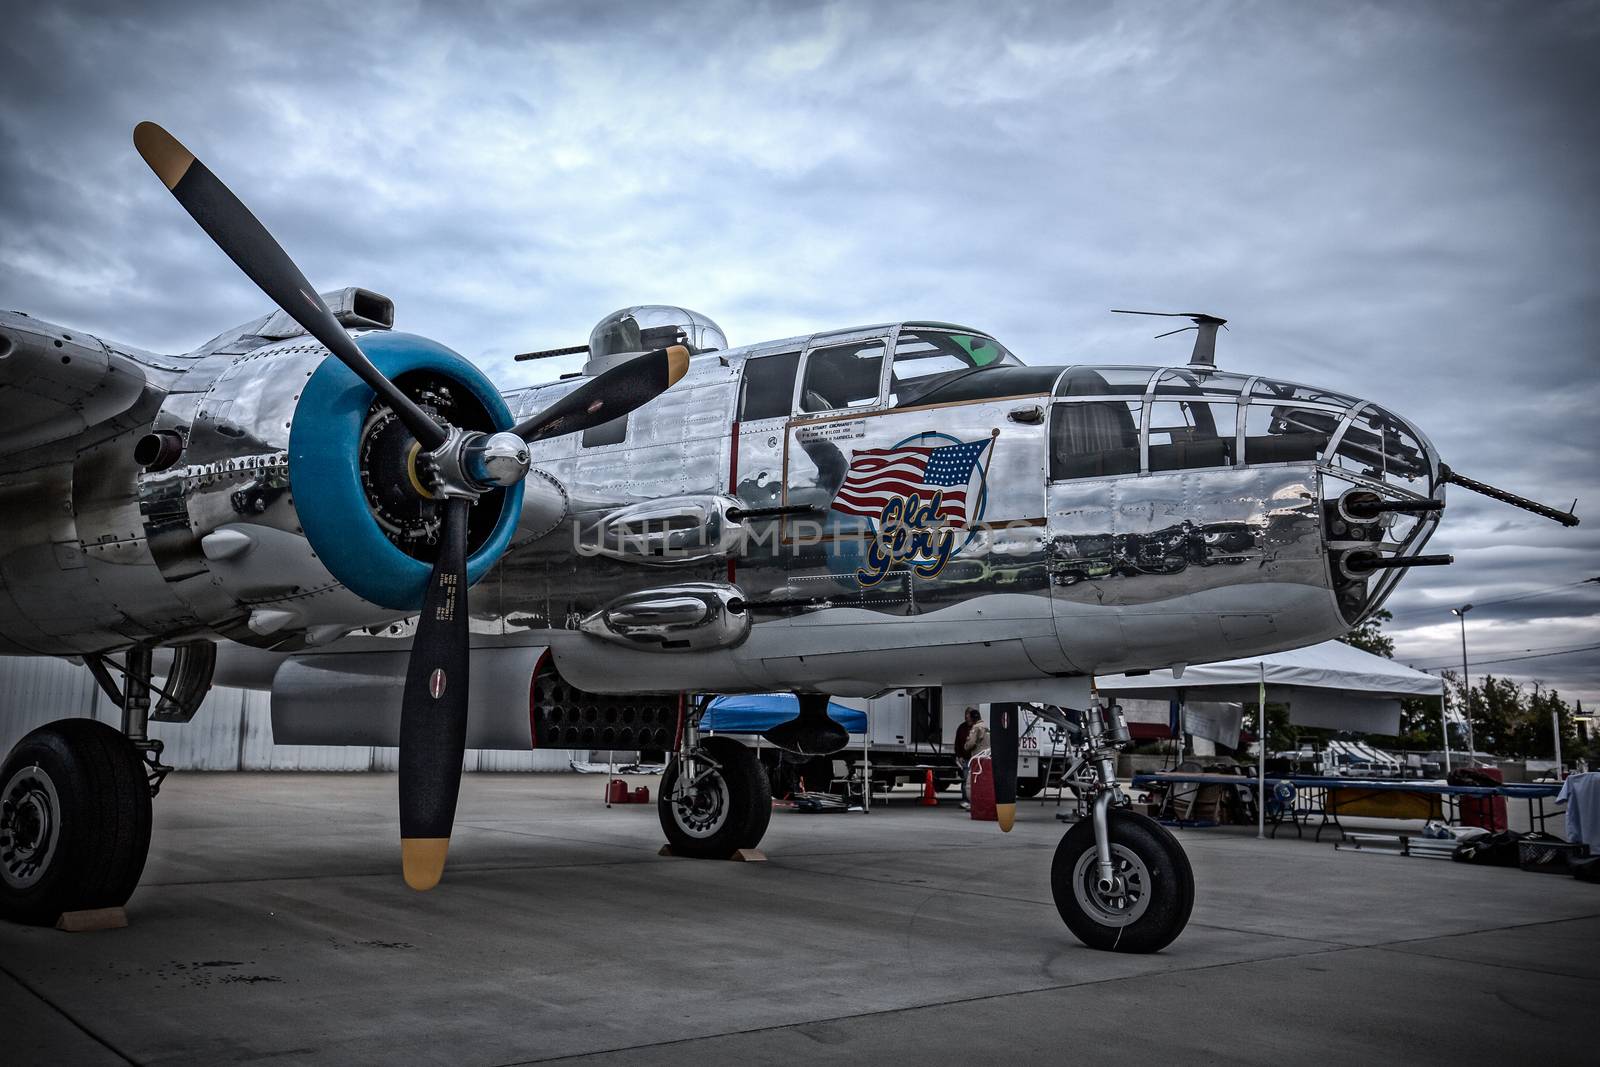 Redding, California, USA- September 28, 2014: A WWII era b-25 Mitchell bomber sits on display at an airshow in northern California and showcases it's 50 calibre machine guns and highly polished skin.